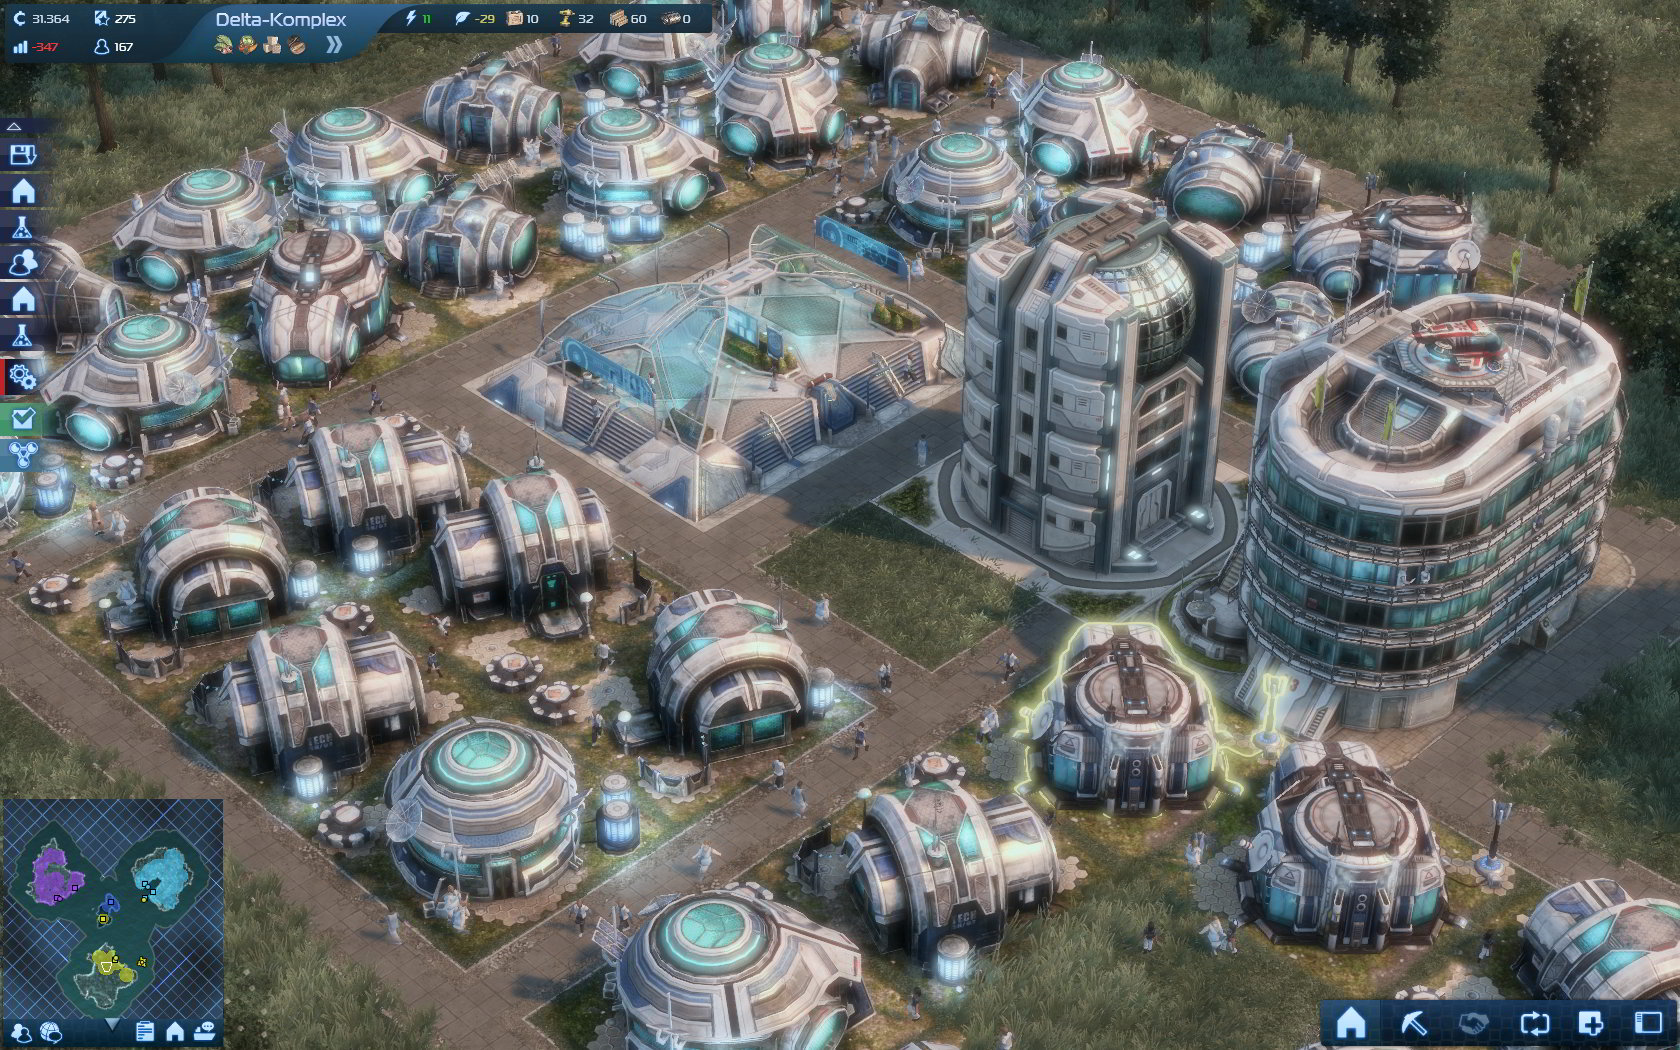 anno 2070 game launches without finising update